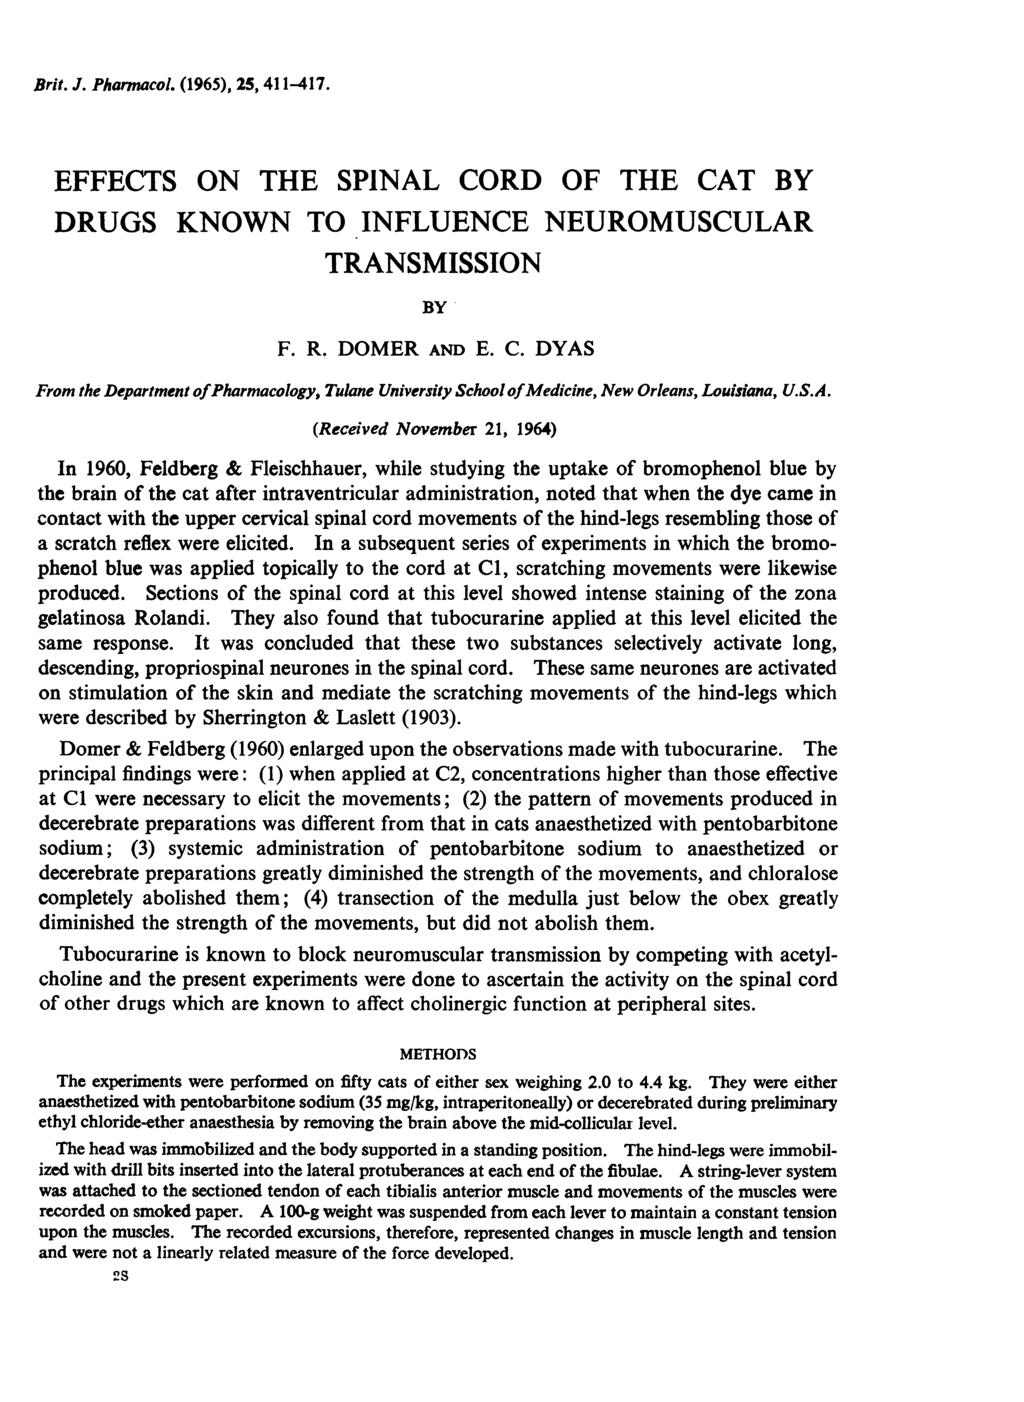 Brit. J. Pharmacol. (1965), 25, 411-417. EFFECTS ON THE SPINAL CORD OF THE CAT BY DRUGS KNOWN TO INFLUENCE NEUROMUSCULAR TRANSMISSION BY F. R. DOMER AND E. C. DYAS From the Department ofpharmacology, Tulane University School ofmedicine, New Orleans, Louisiana, U.